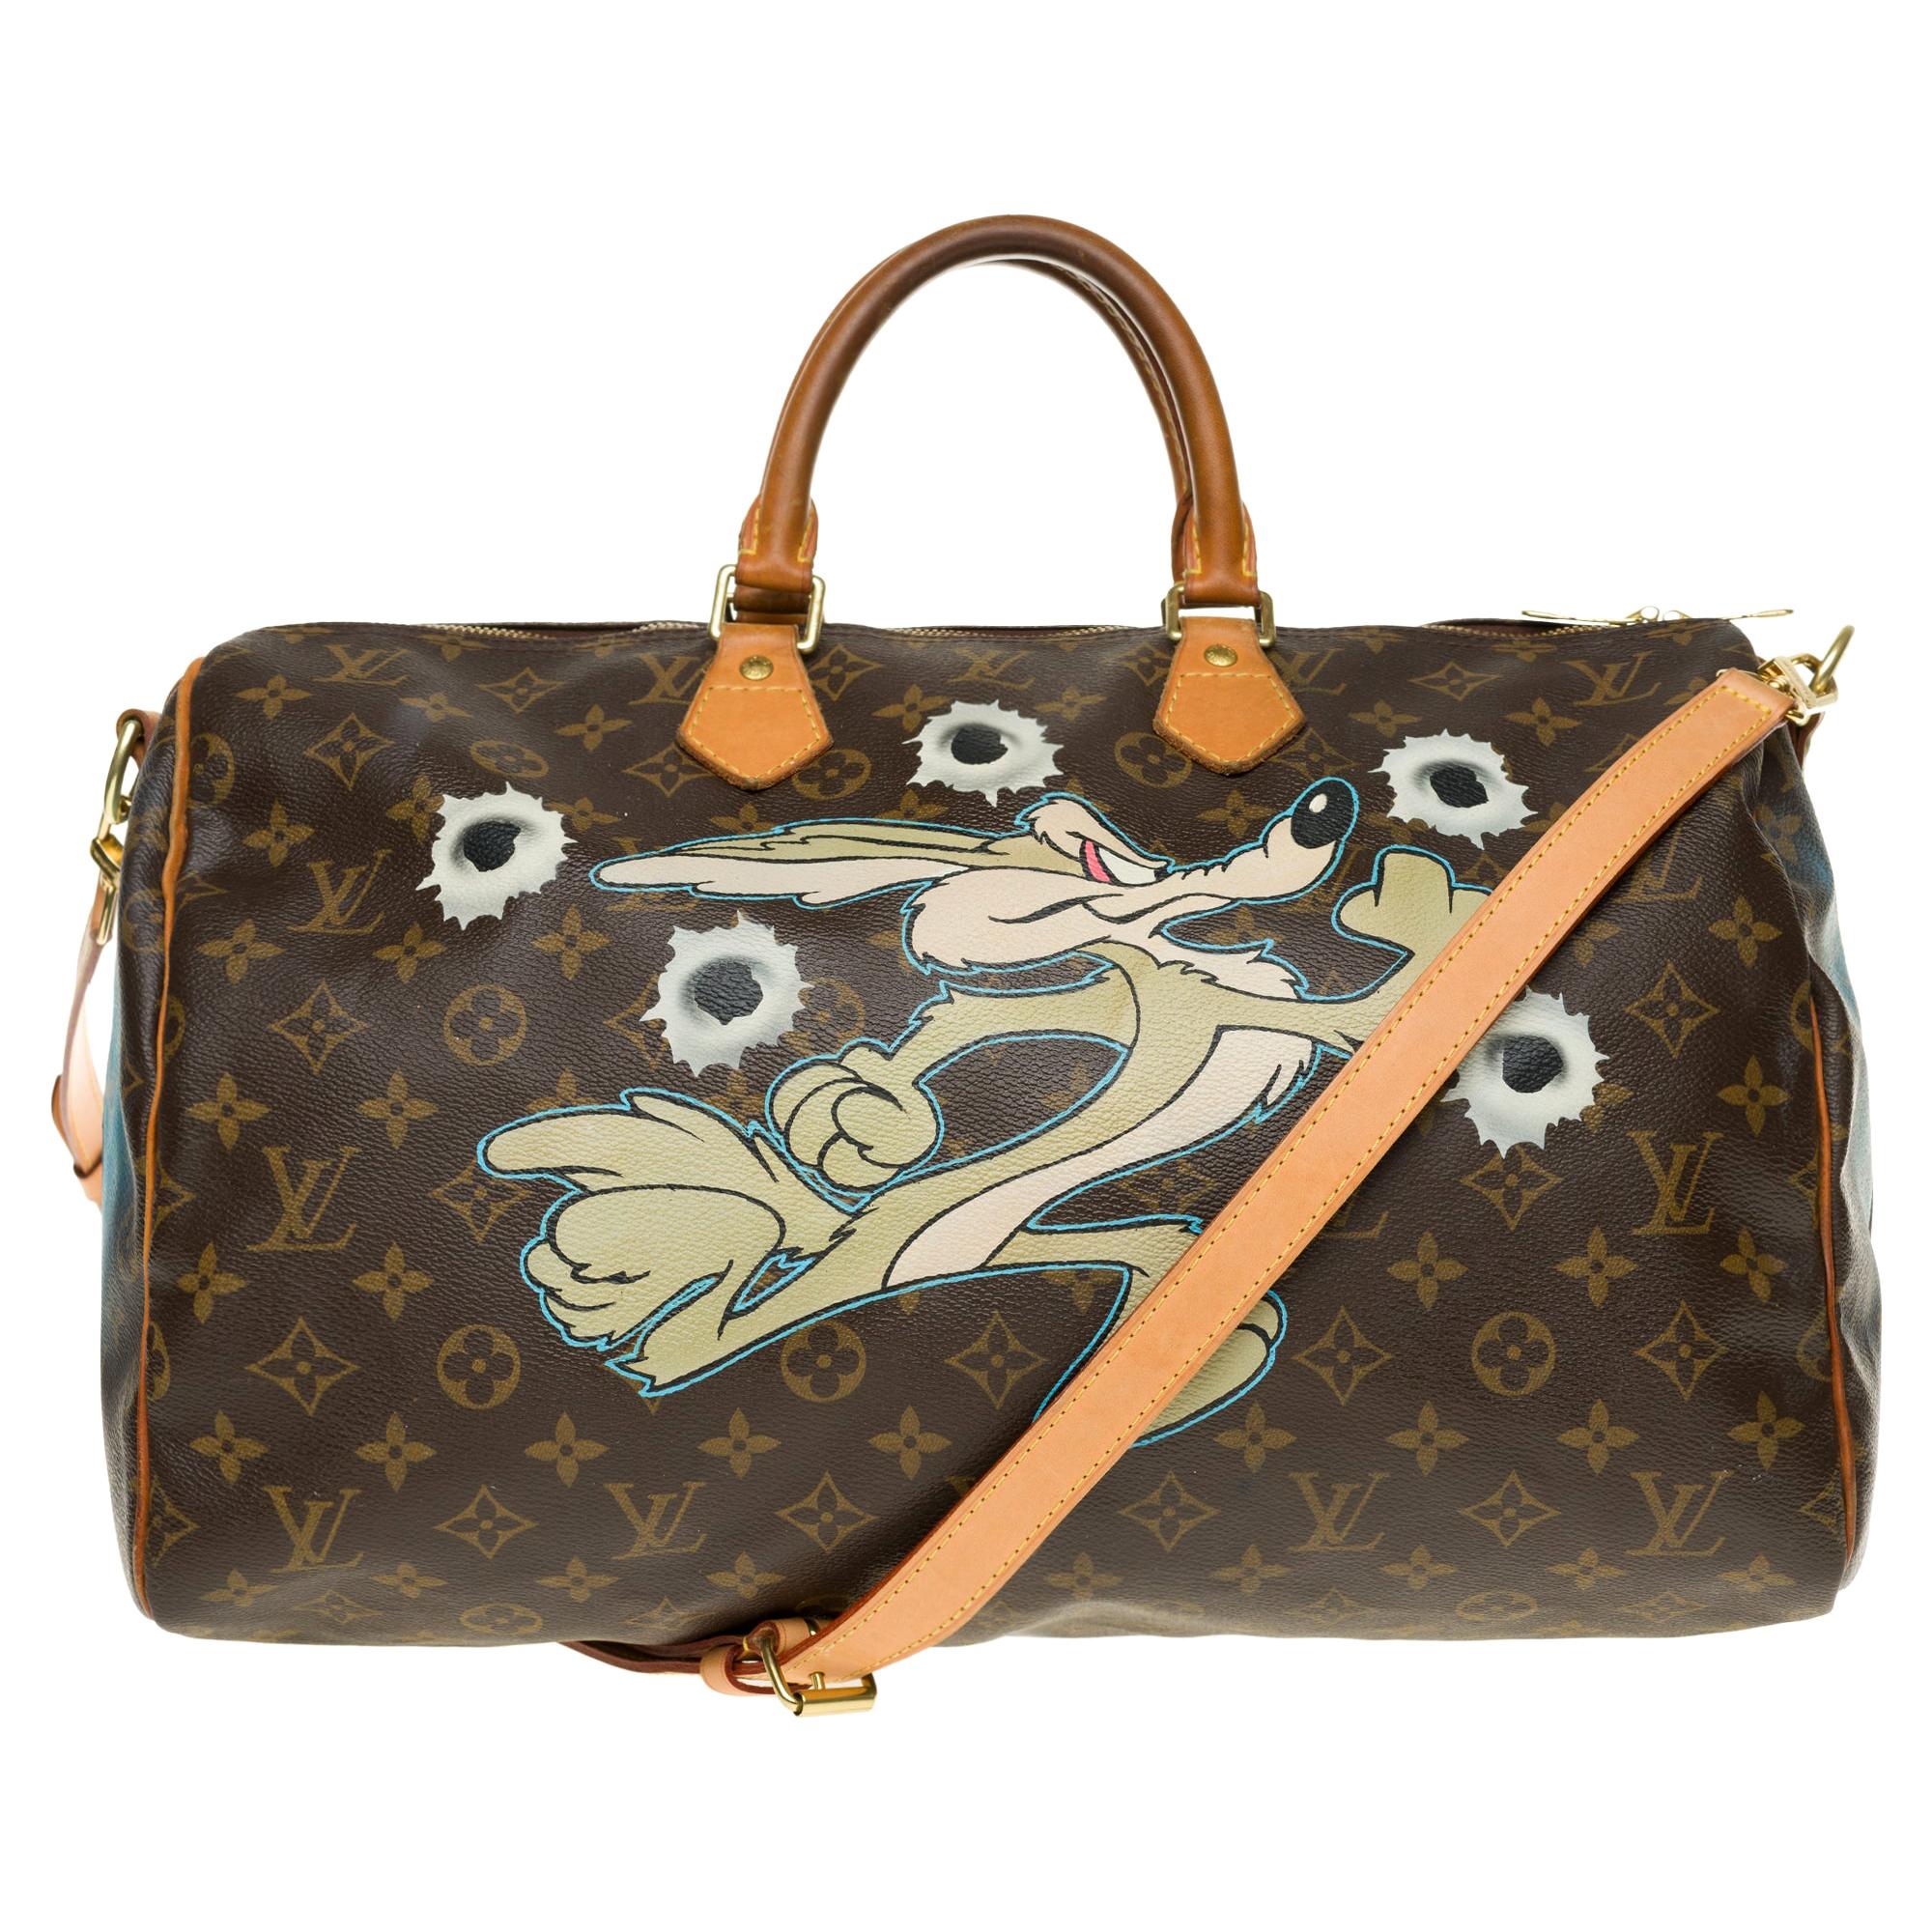 Louis Vuitton Speedy 40 with strap in Monogram canvas customized "Dead or alive"